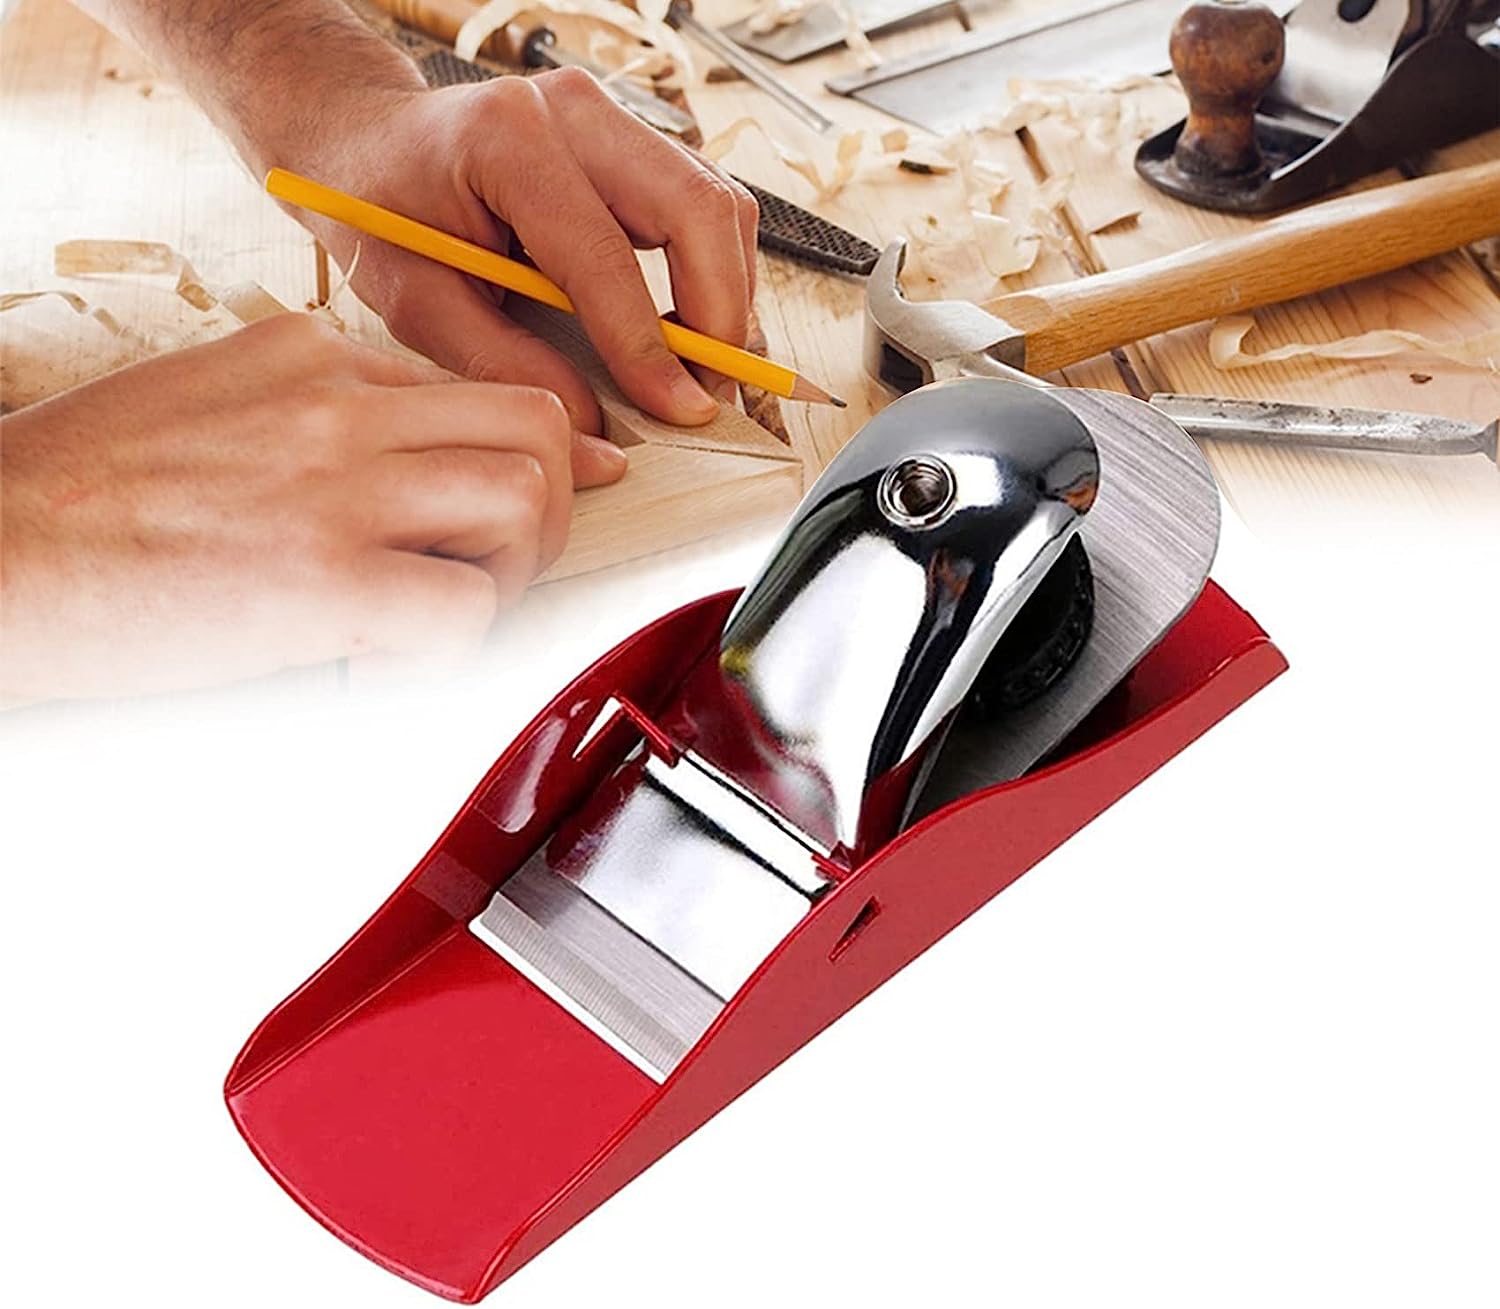 Mini Hand Planer 3-1/2 inch Red Adjustable, used for [...]